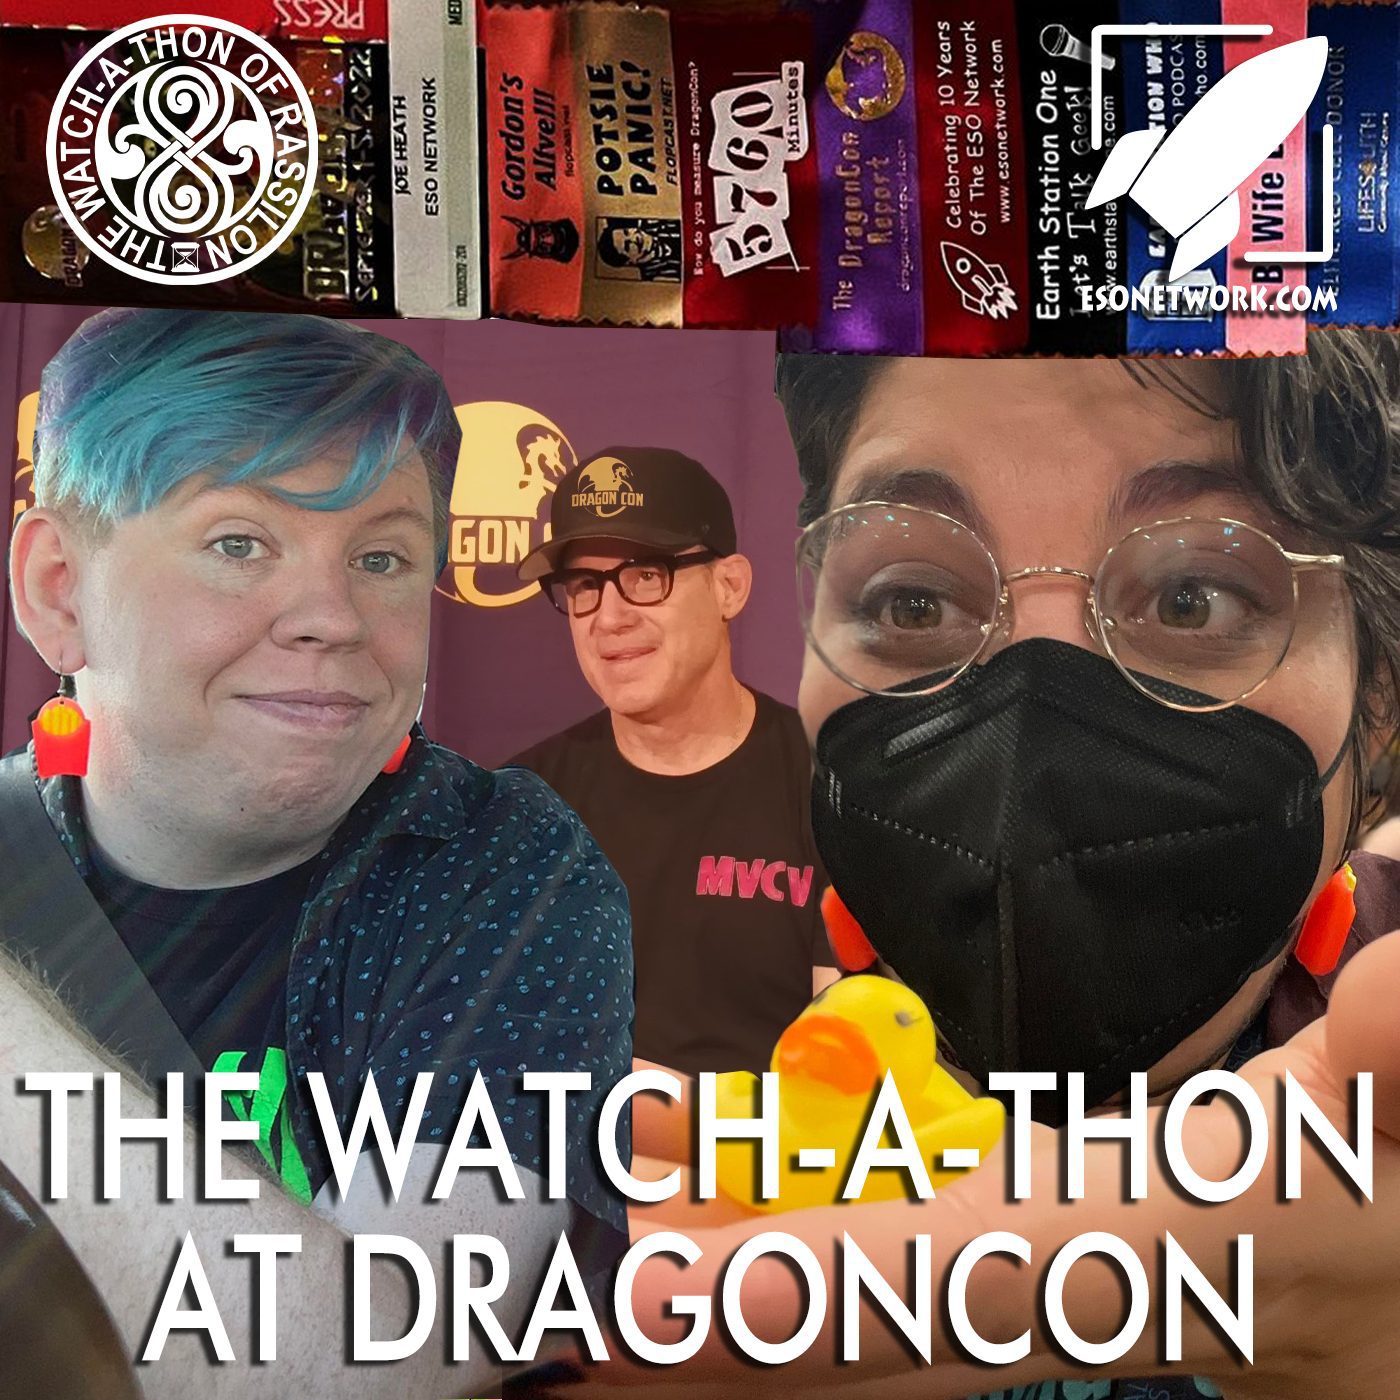 The Watch-A-Thon at DragonCon